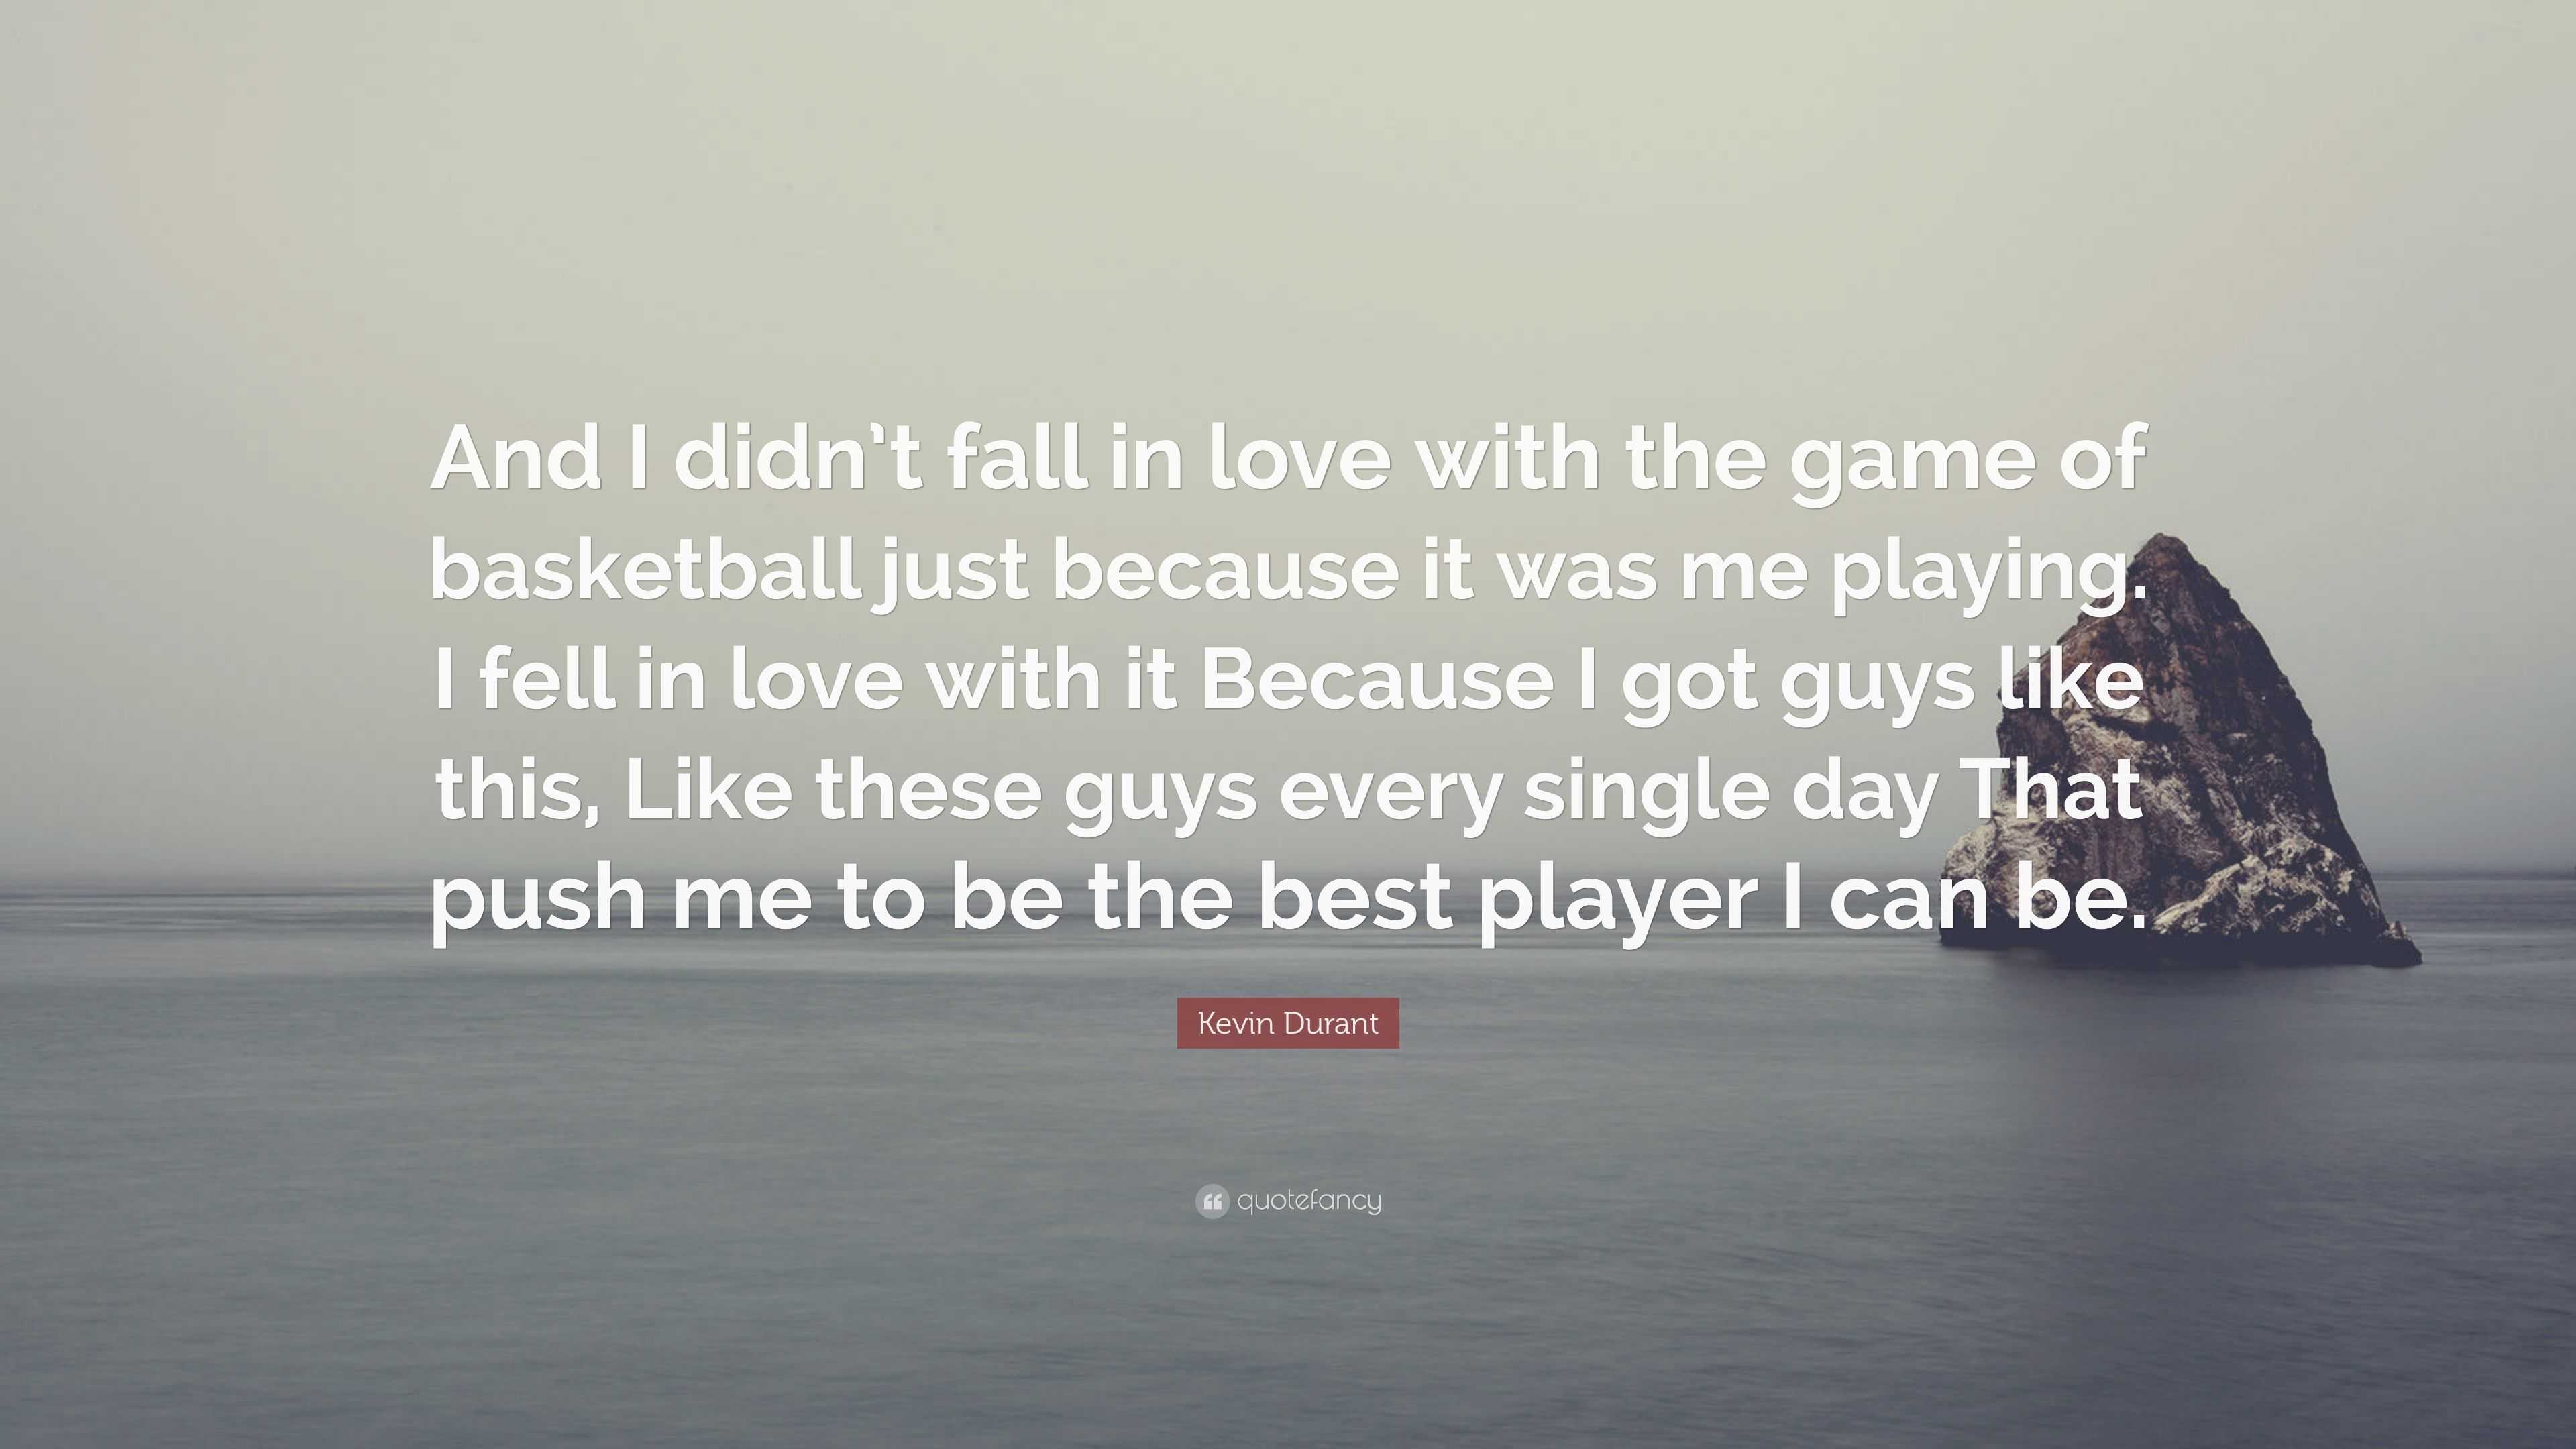 Kevin Durant Quote “And I didn t fall in love with the game